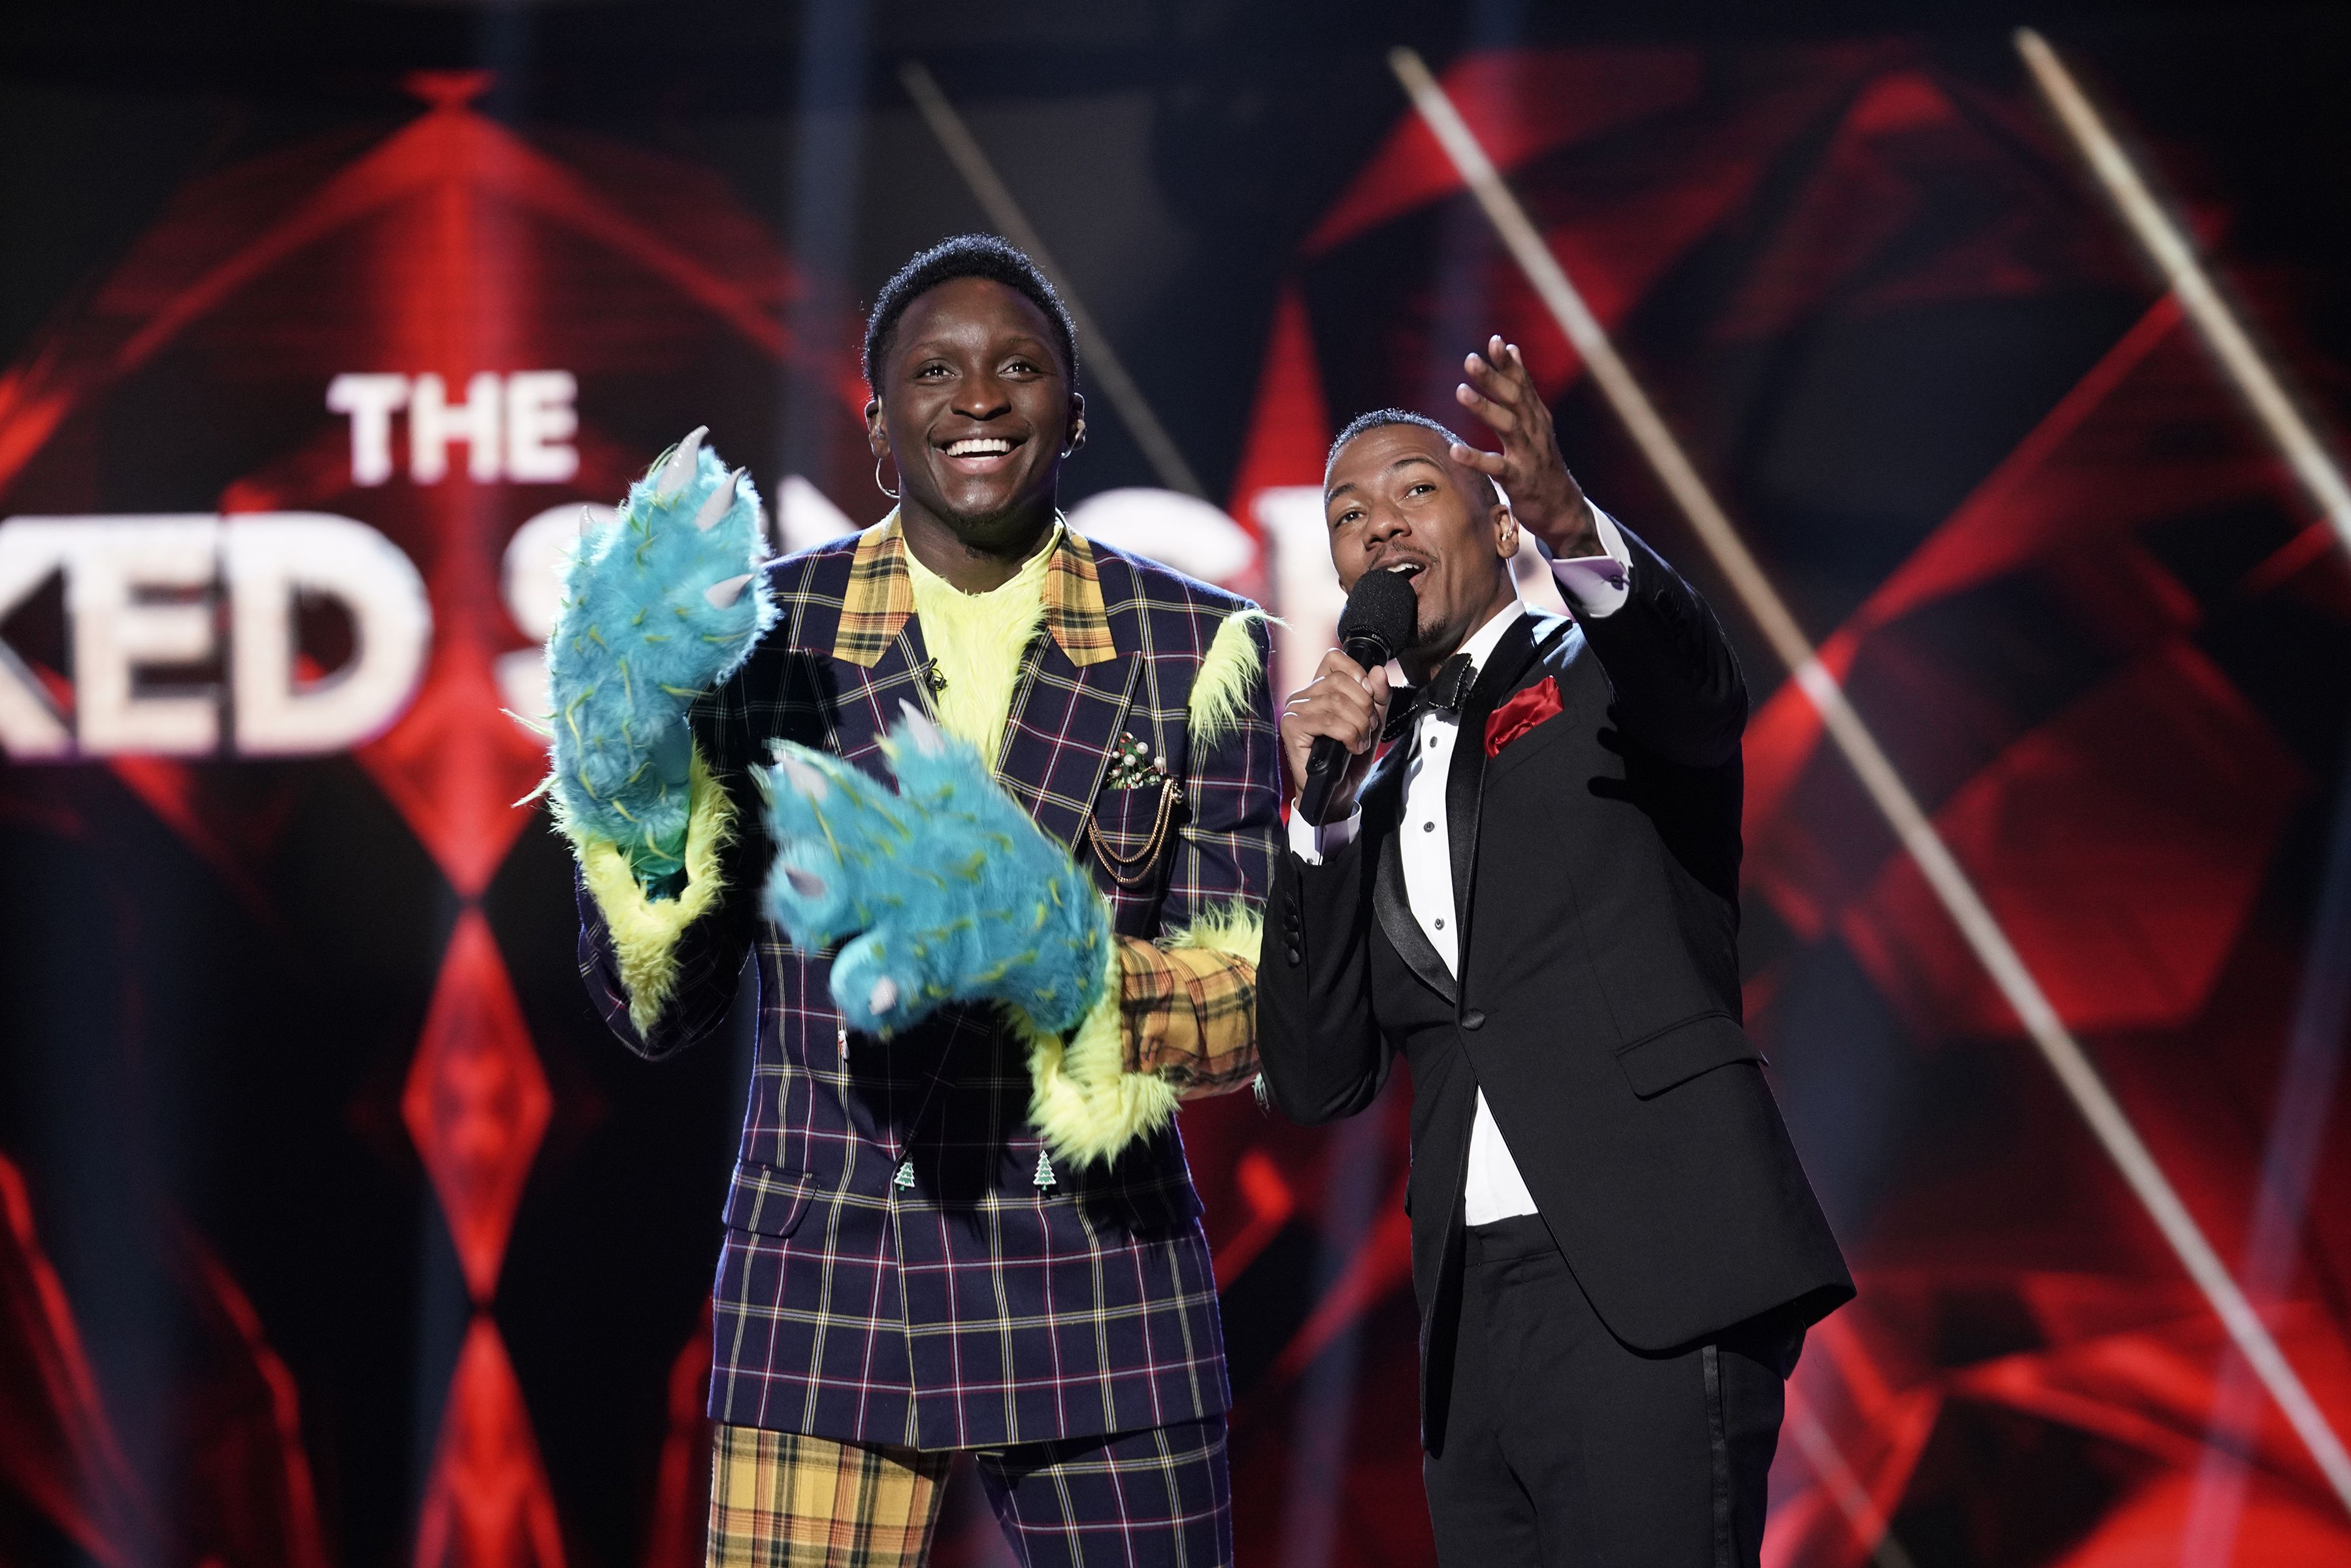 Was Voted Off 'The Masked - Who 'The Masked Singer' in Season 2?